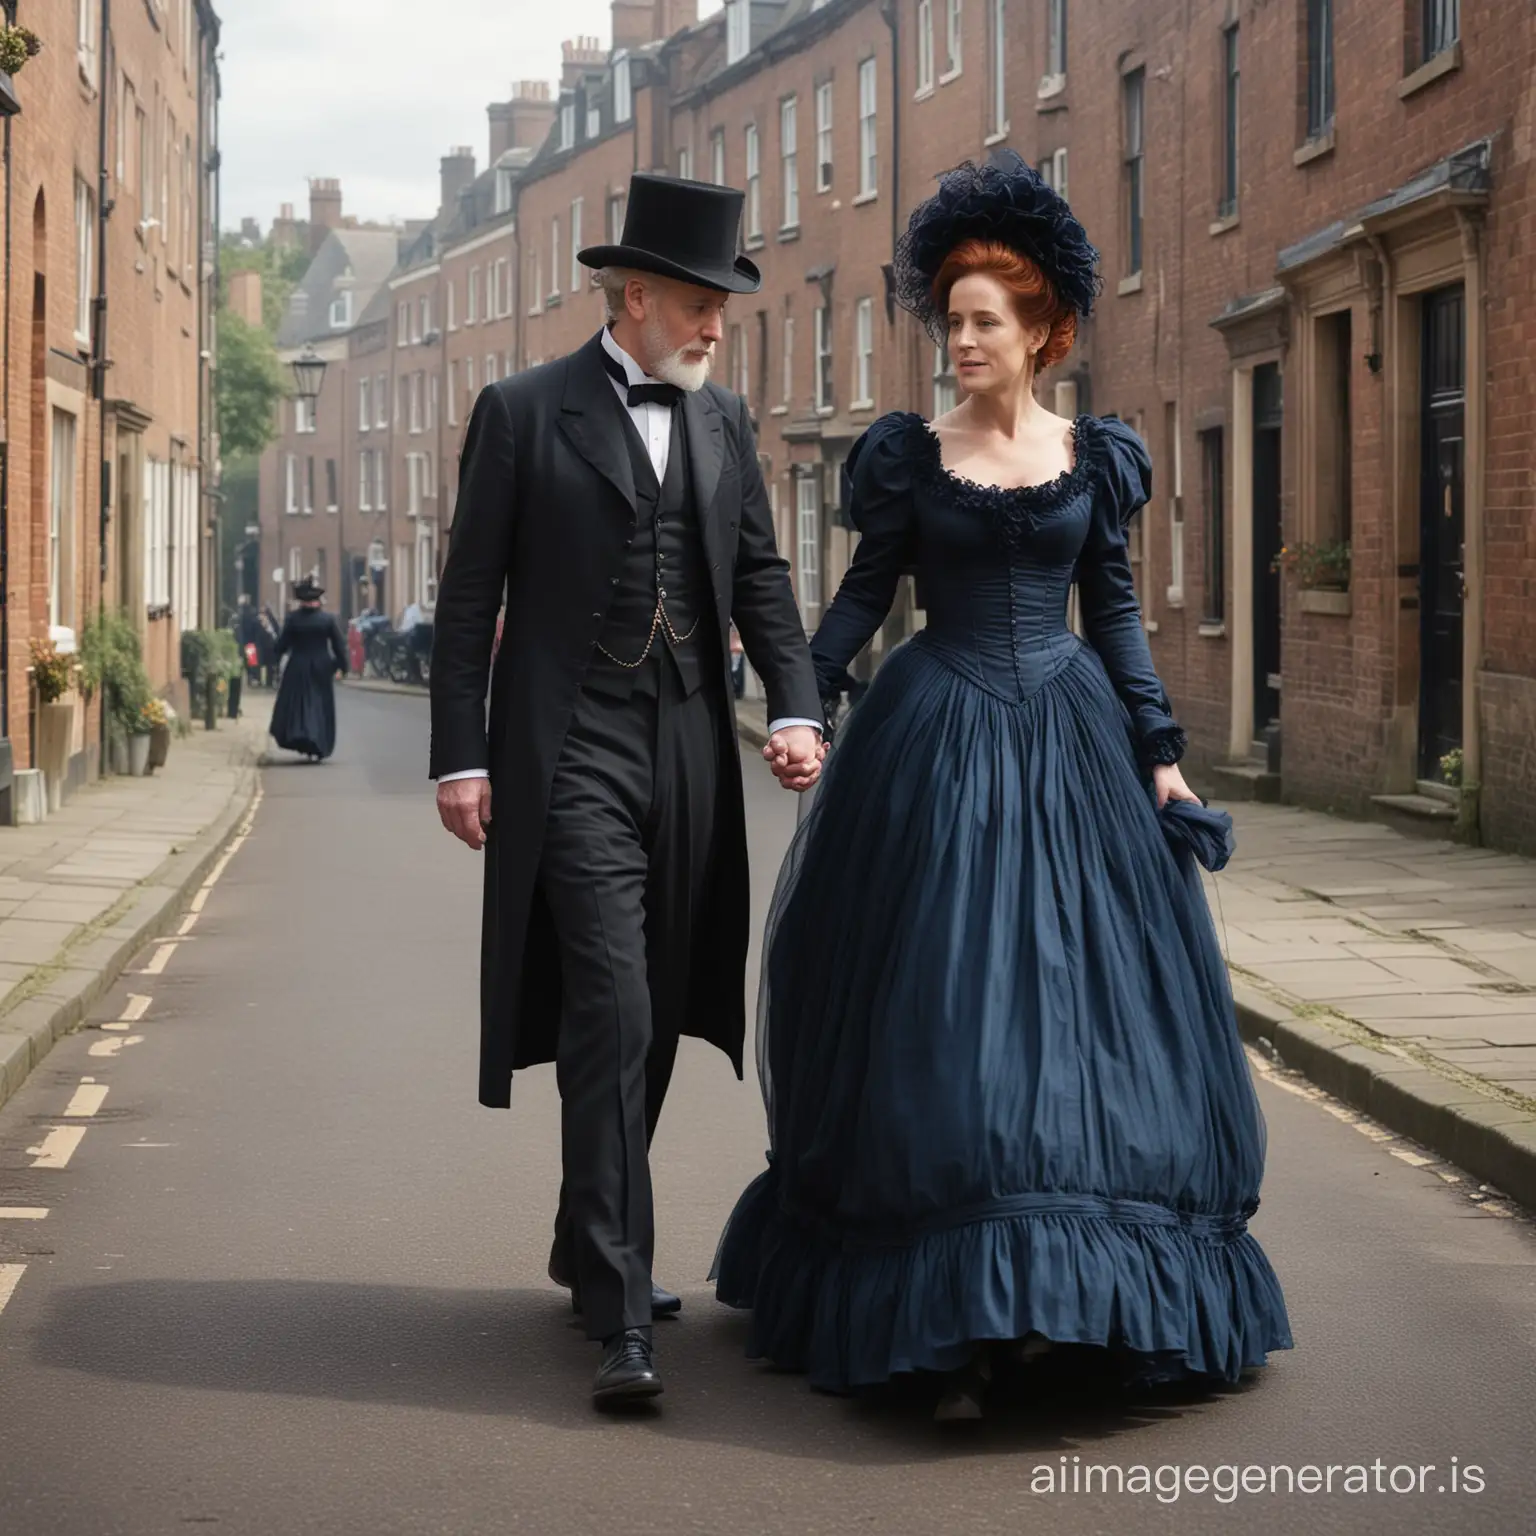 red hair Gillian Anderson wearing a dark blue floor-length loose billowing 1860 Victorian crinoline poofy dress with a frilly bonnet walking on a Victorian era street with an old man dressed into a black Victorian suit who seems to be her newlywed husband